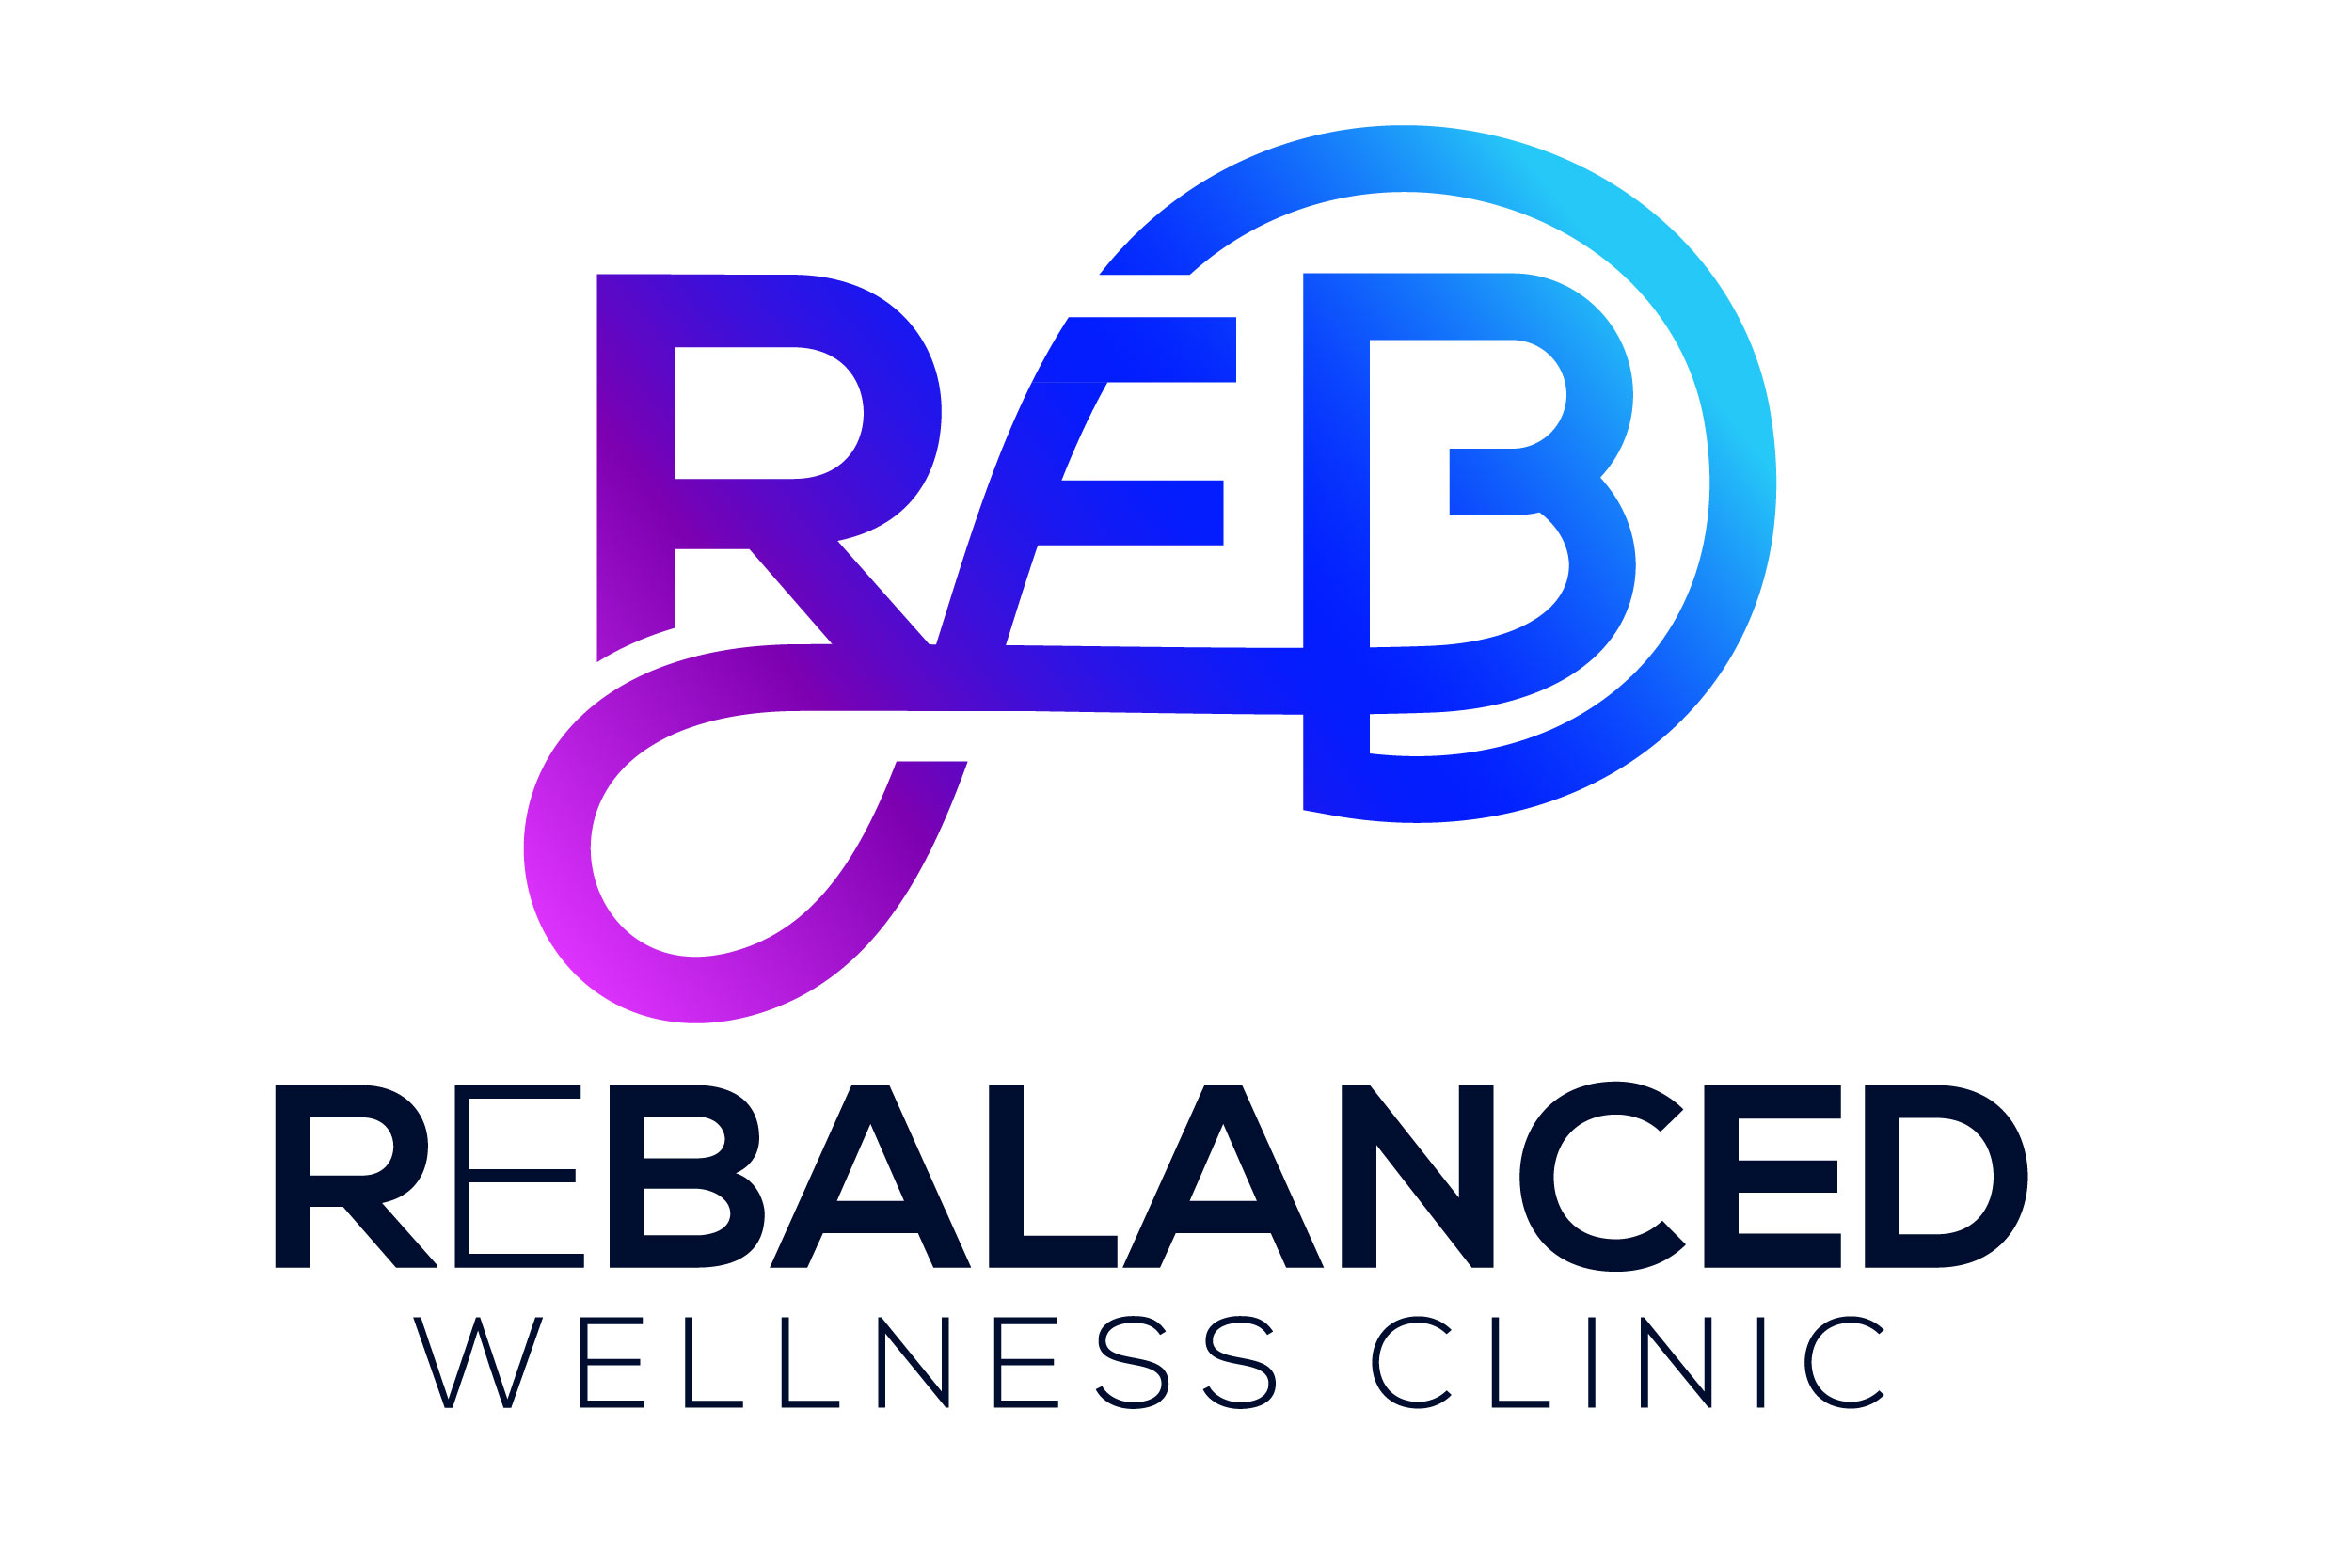 Hormone Therapy Roswell Georgia - Medical Weight Loss - BHRT TRT - ReBalanced Wellness Clinic